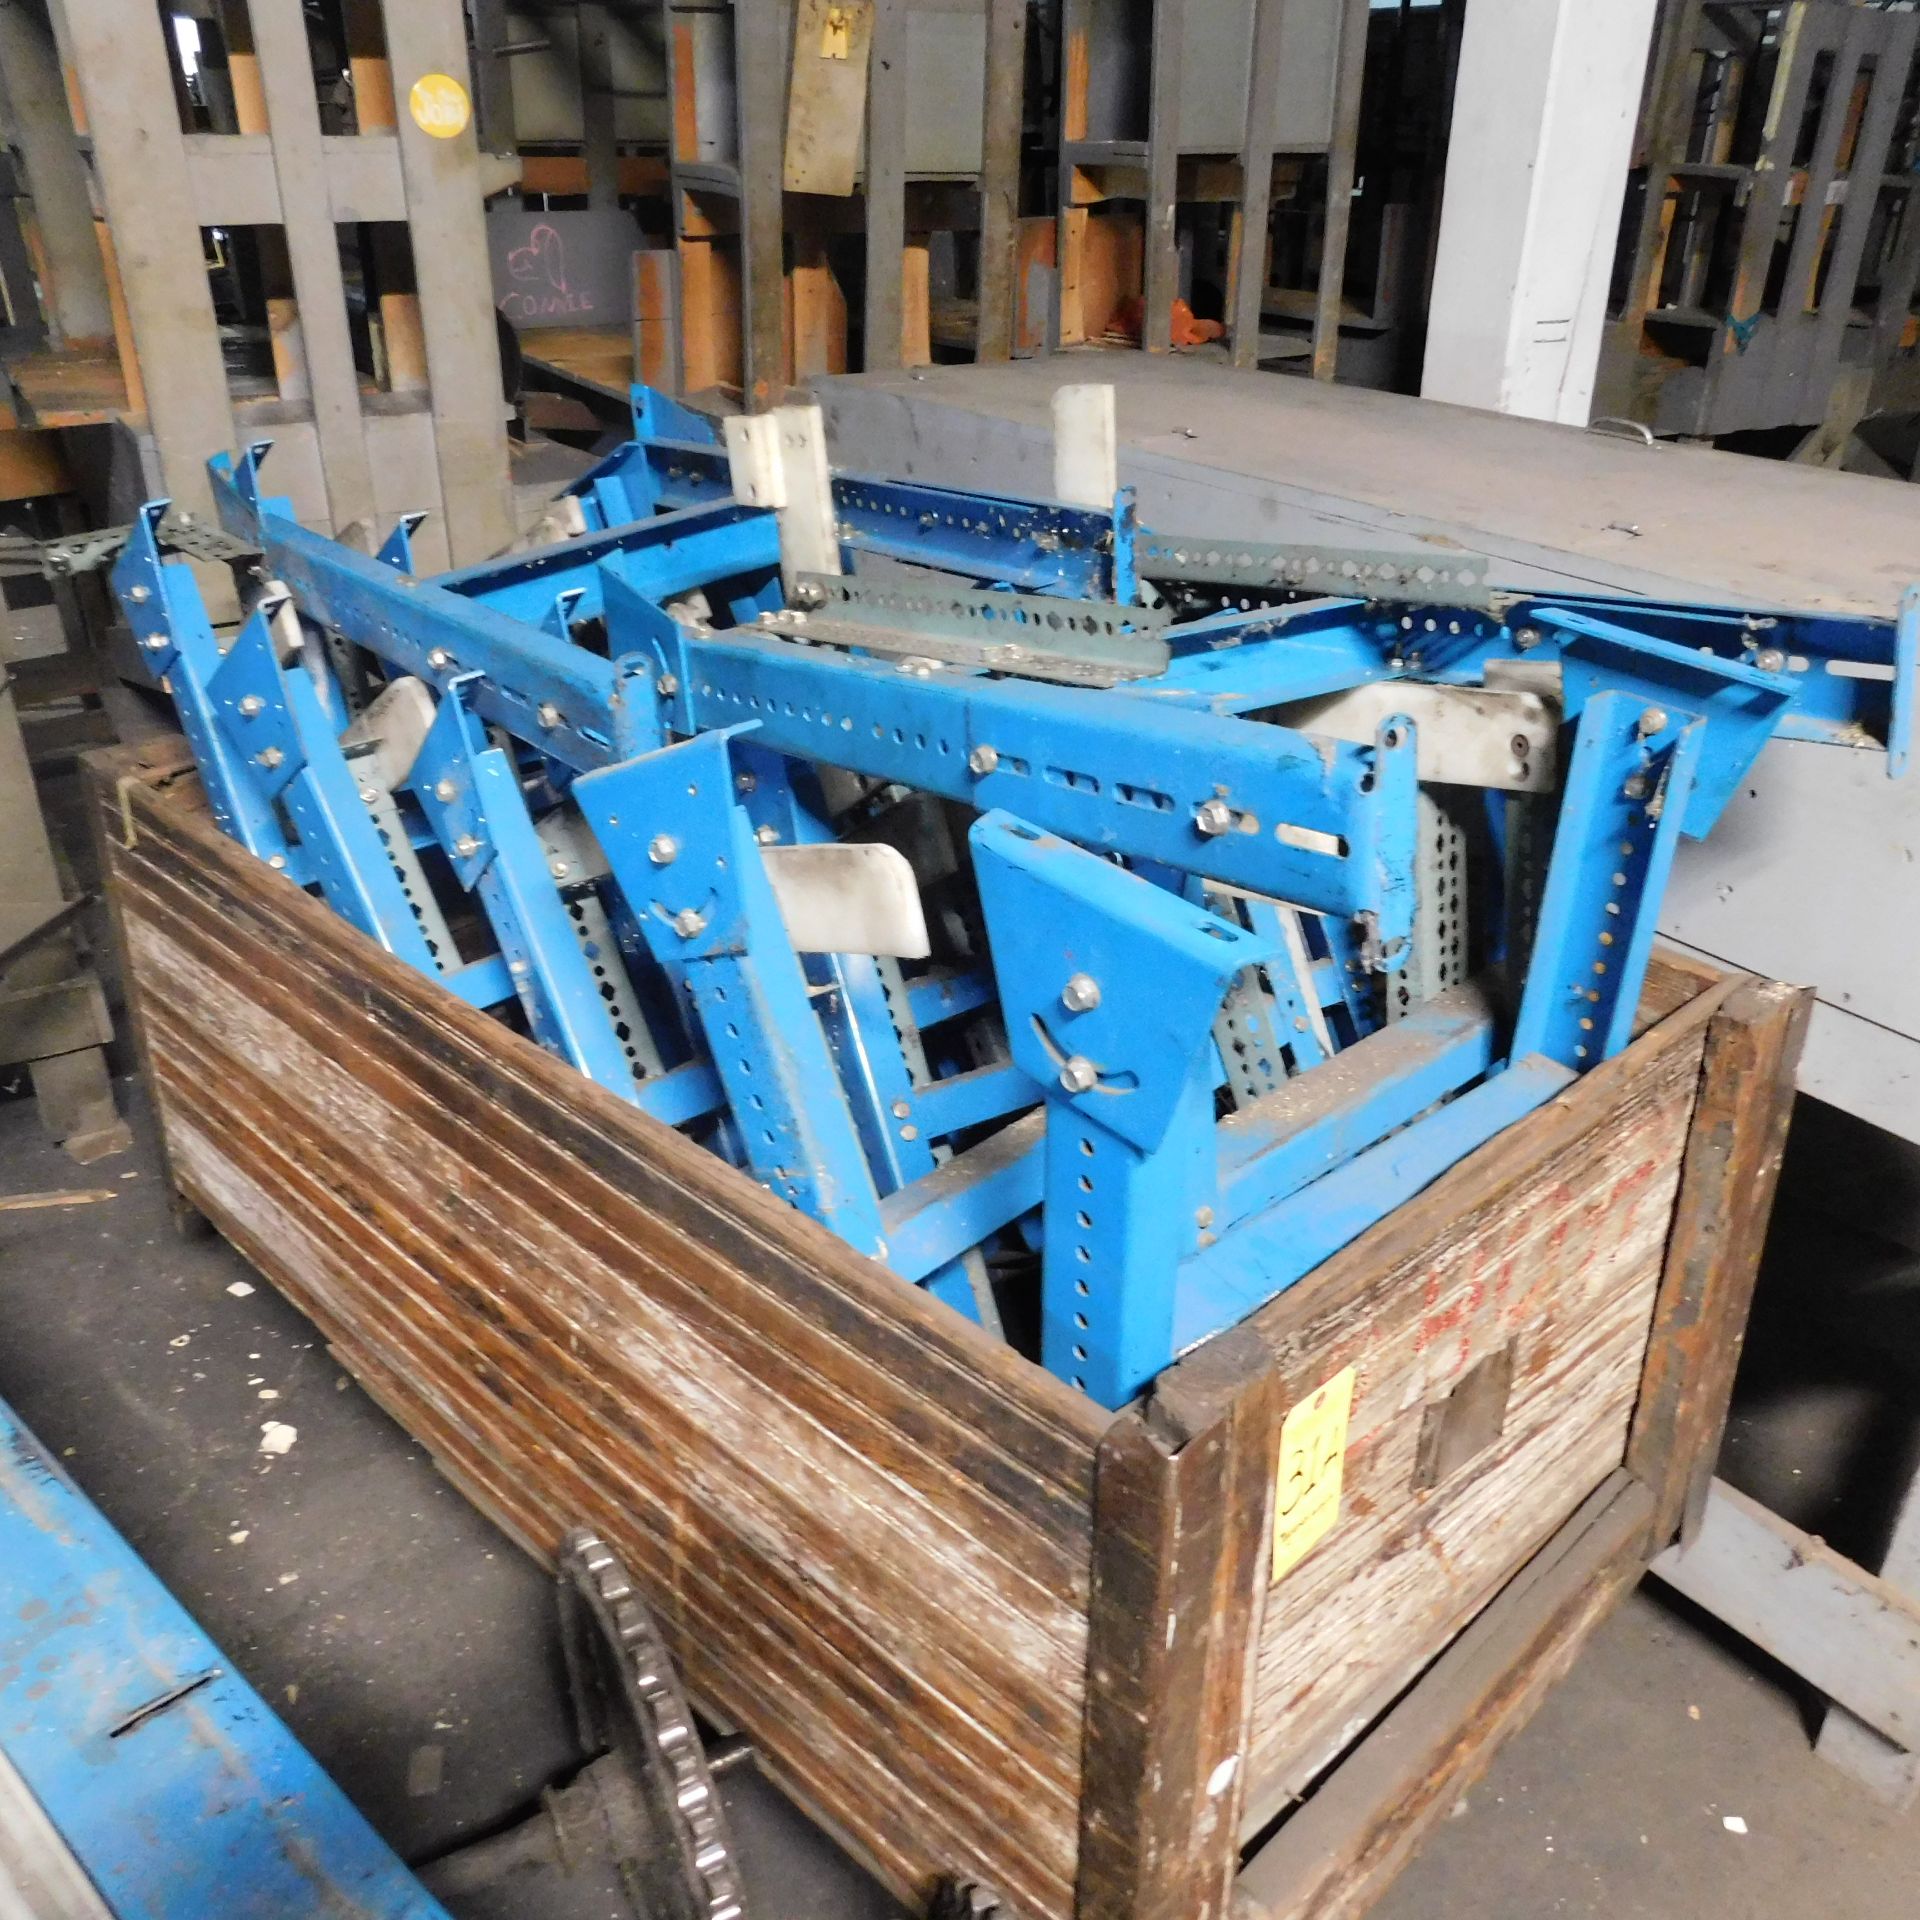 Power Belt Conveyor, Not Assembled, Approx. 60' Length X 18" Width, with Drive, Controls, Legs - Image 2 of 5